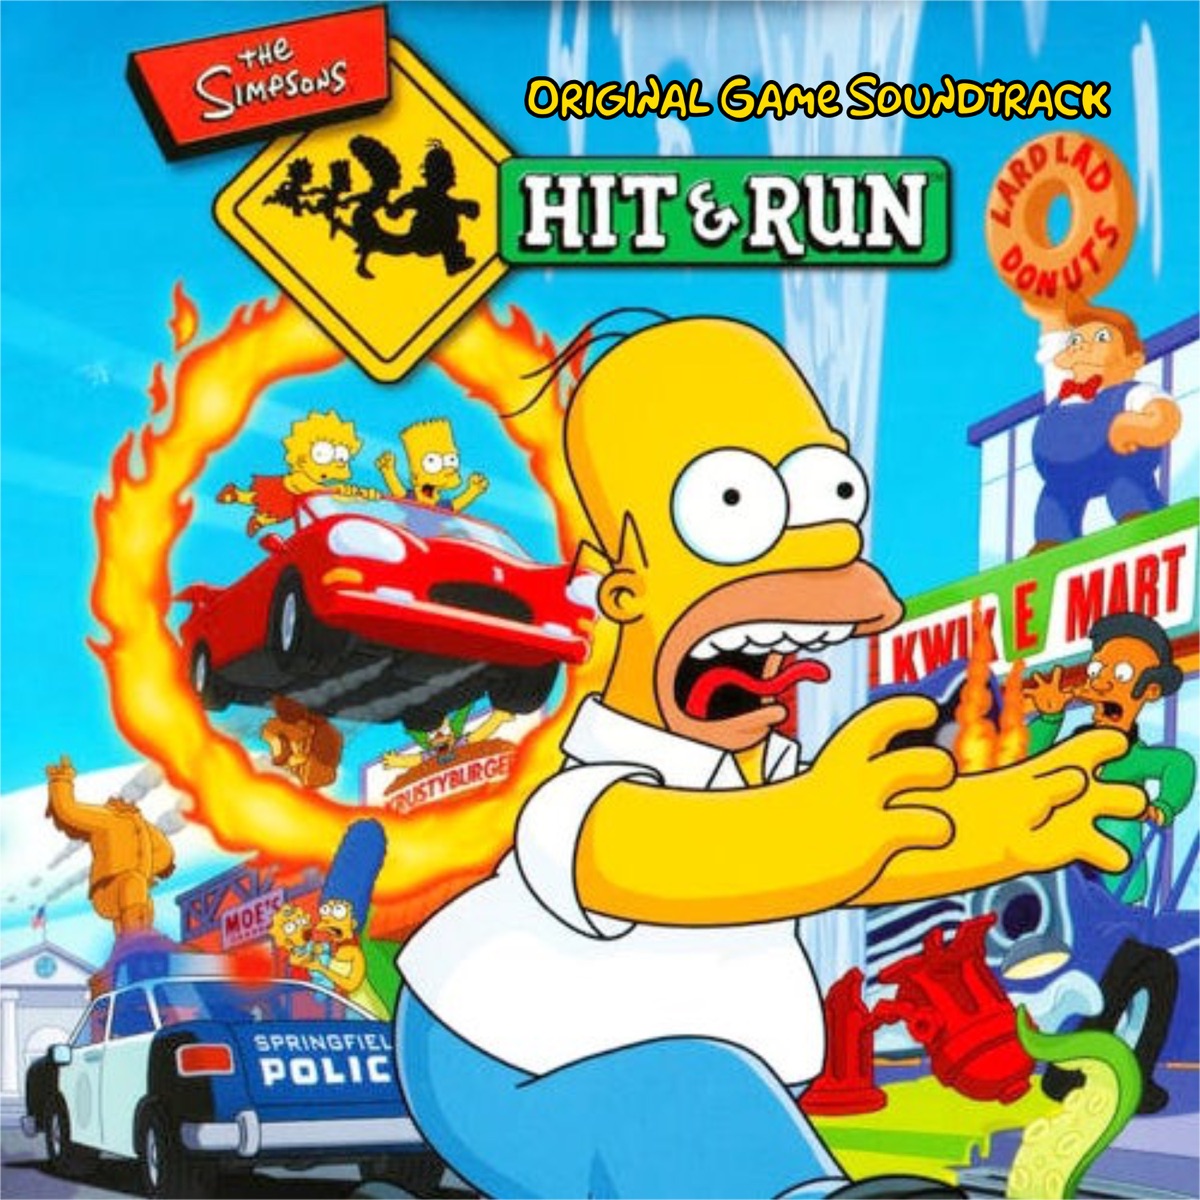 The Simpsons Hit & Run (Original Game Soundtrack) - Album by The Simpsons -  Apple Music